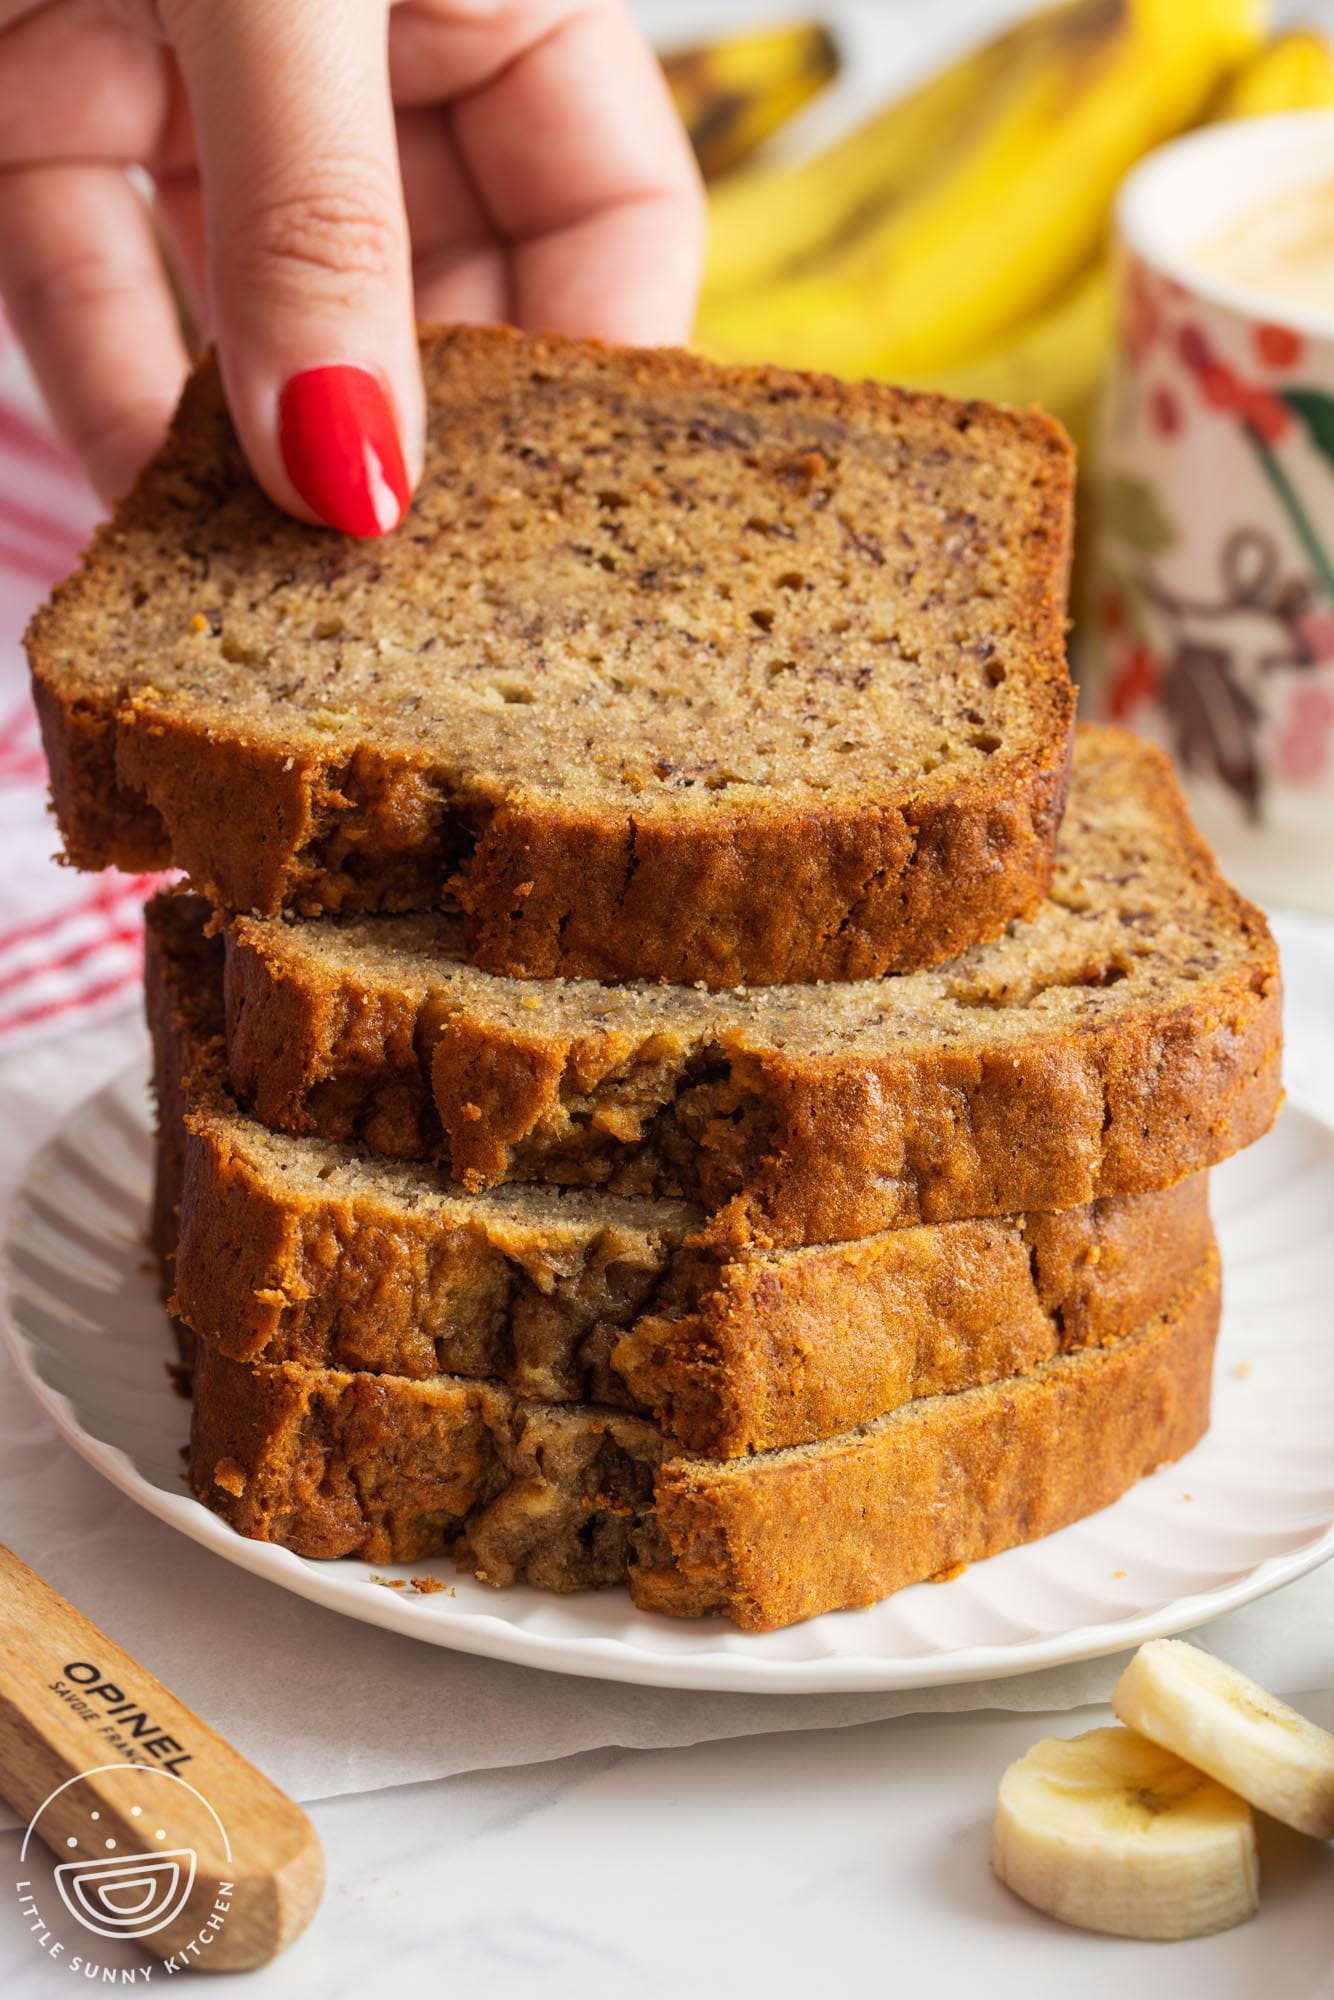 four slices of banana bread stacked on a plate. A hand is removing the top slice.